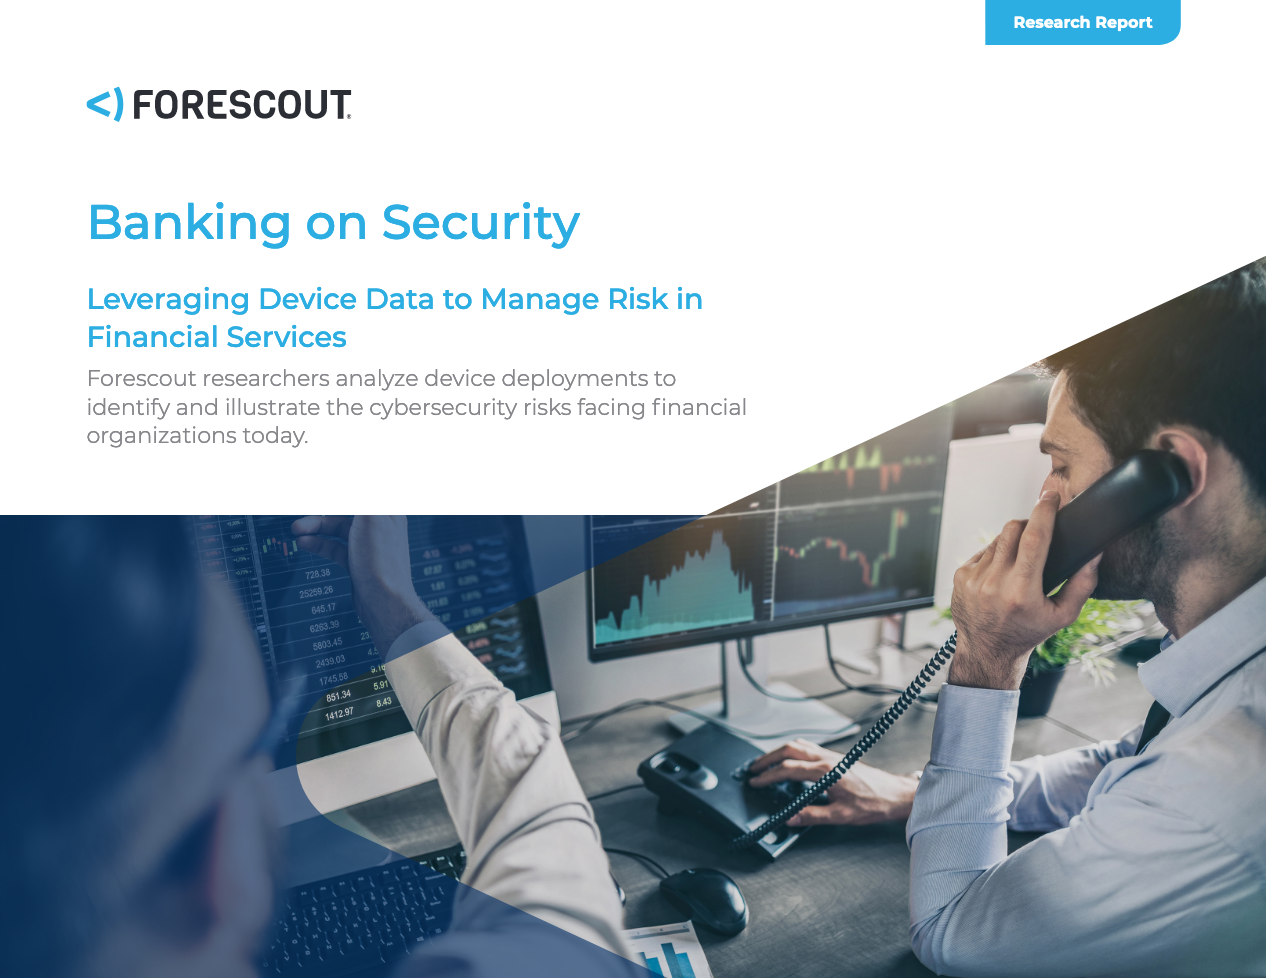 Banking on Security - Banking on Security LEVERAGING DEVICE DATA TO MANAGE RISK IN FINANCIAL SERVICES